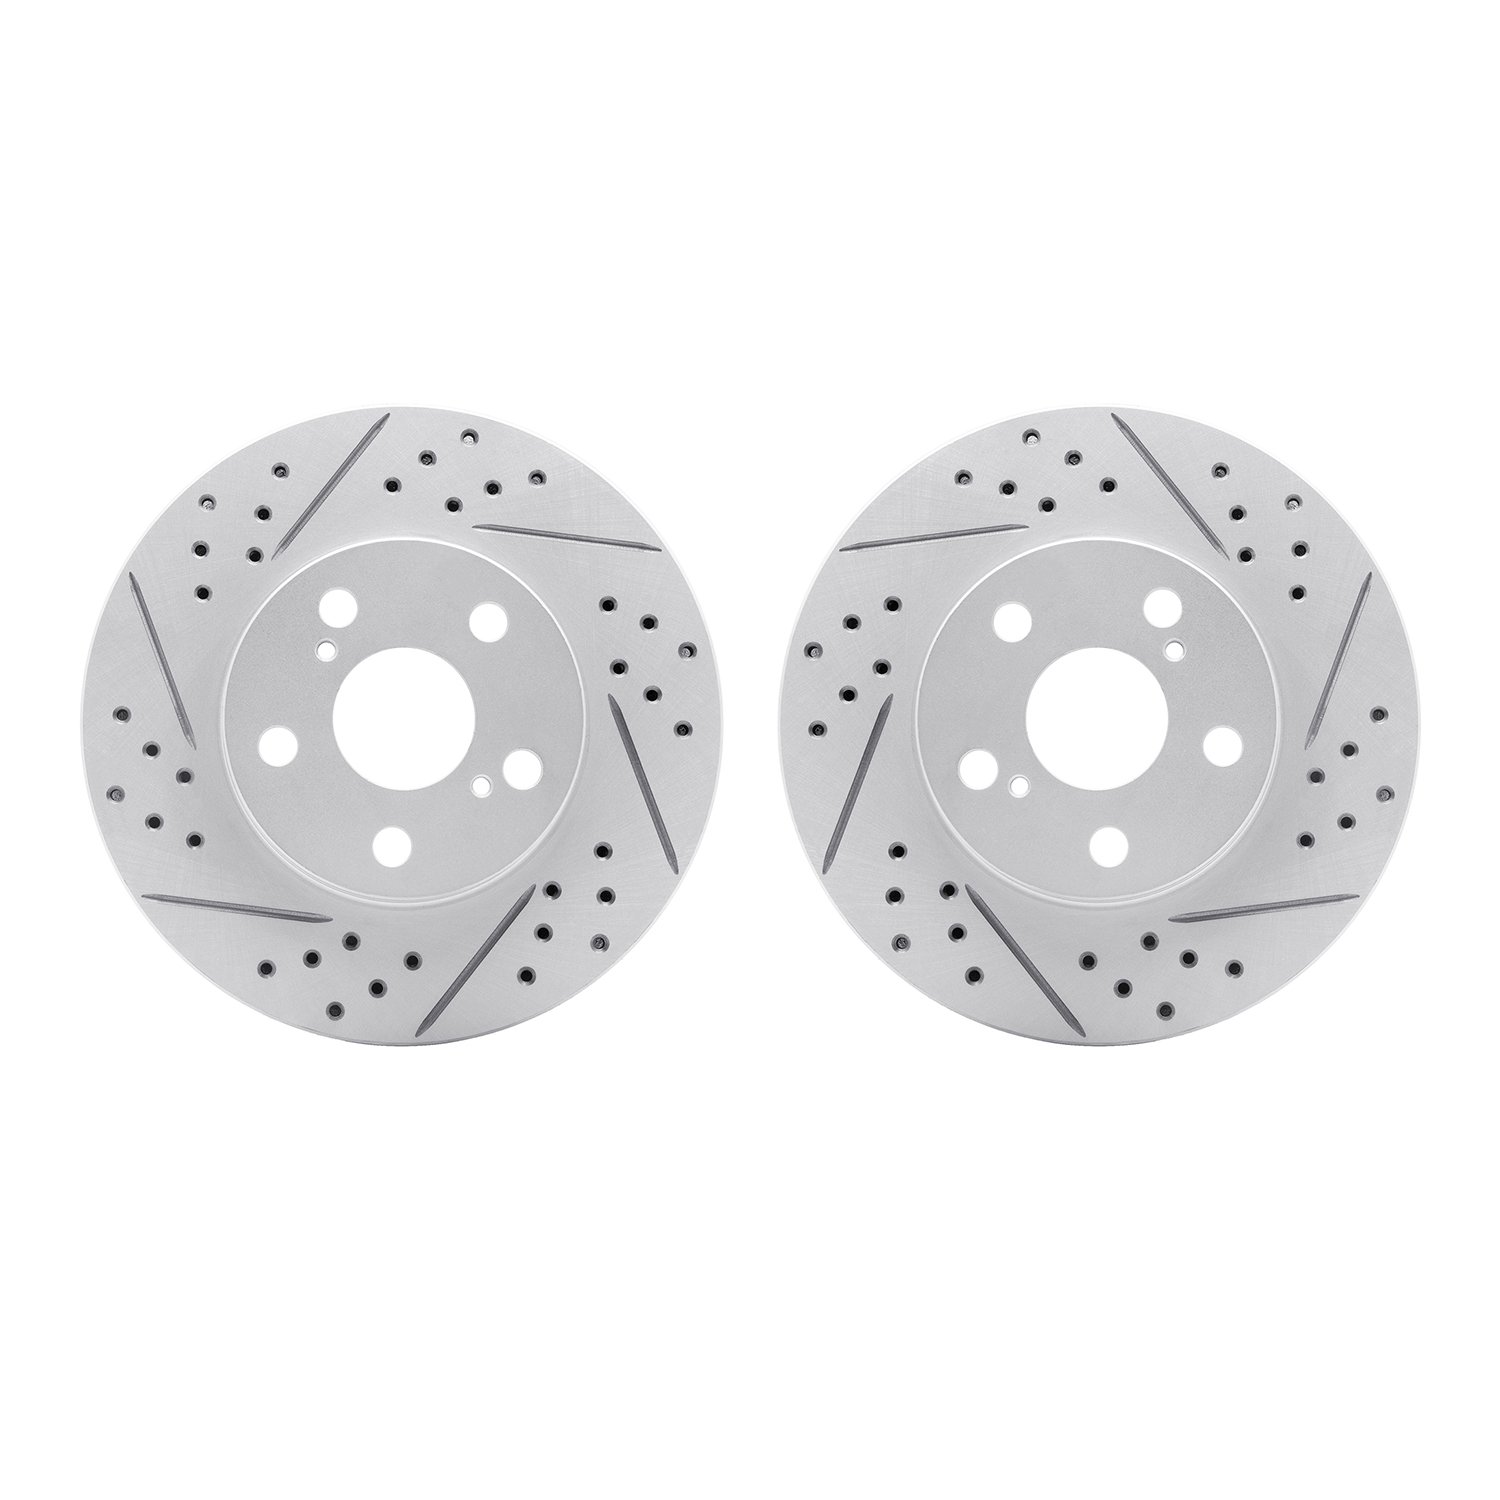 2002-76001 Geoperformance Drilled/Slotted Brake Rotors, 2010-2017 Lexus/Toyota/Scion, Position: Front